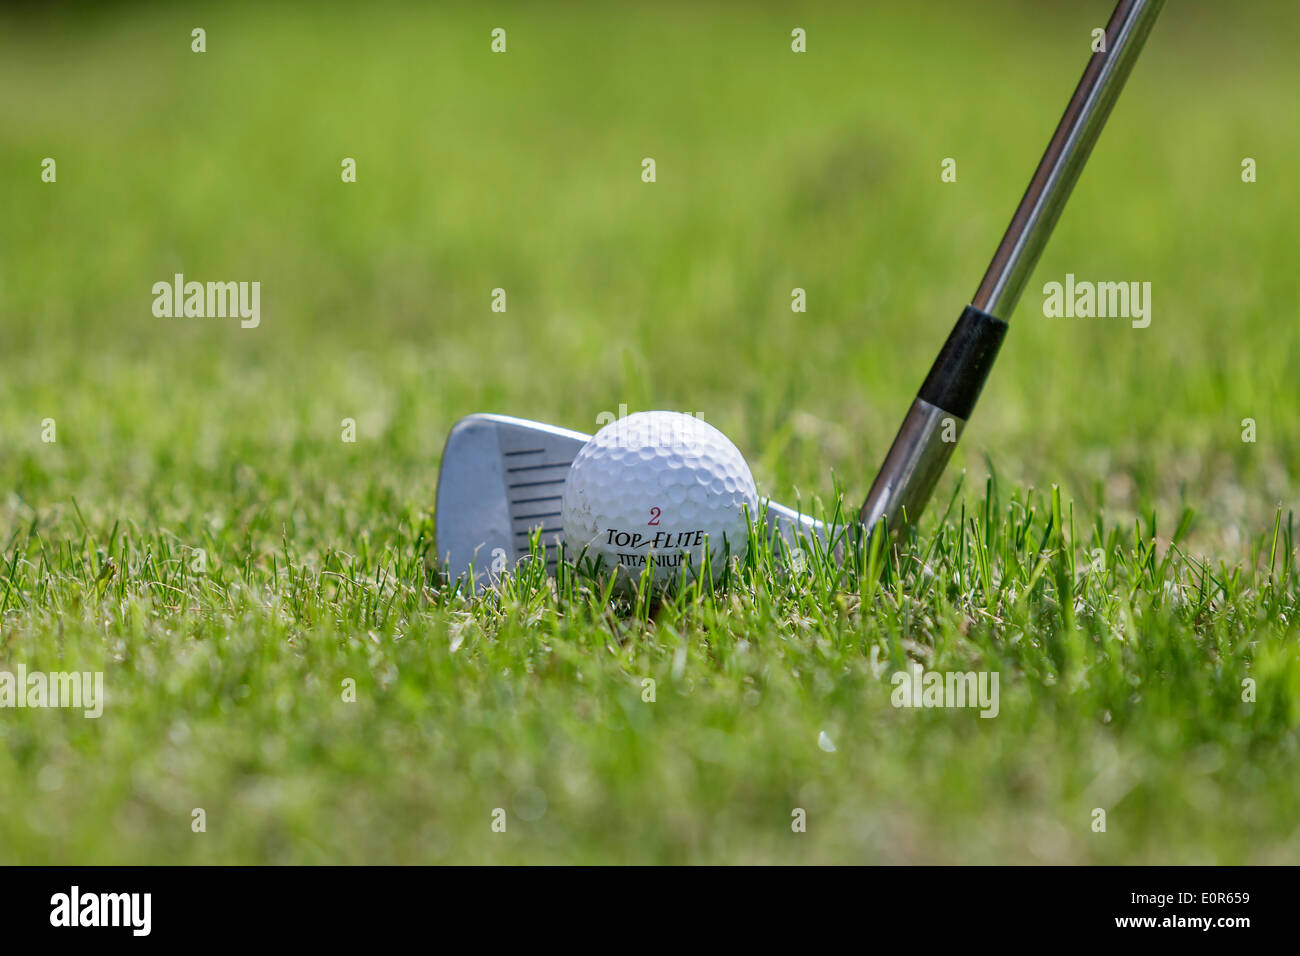 A golf club is pictured as the player prepares to hit a golf ball that is sitting on green grass. Stock Photo